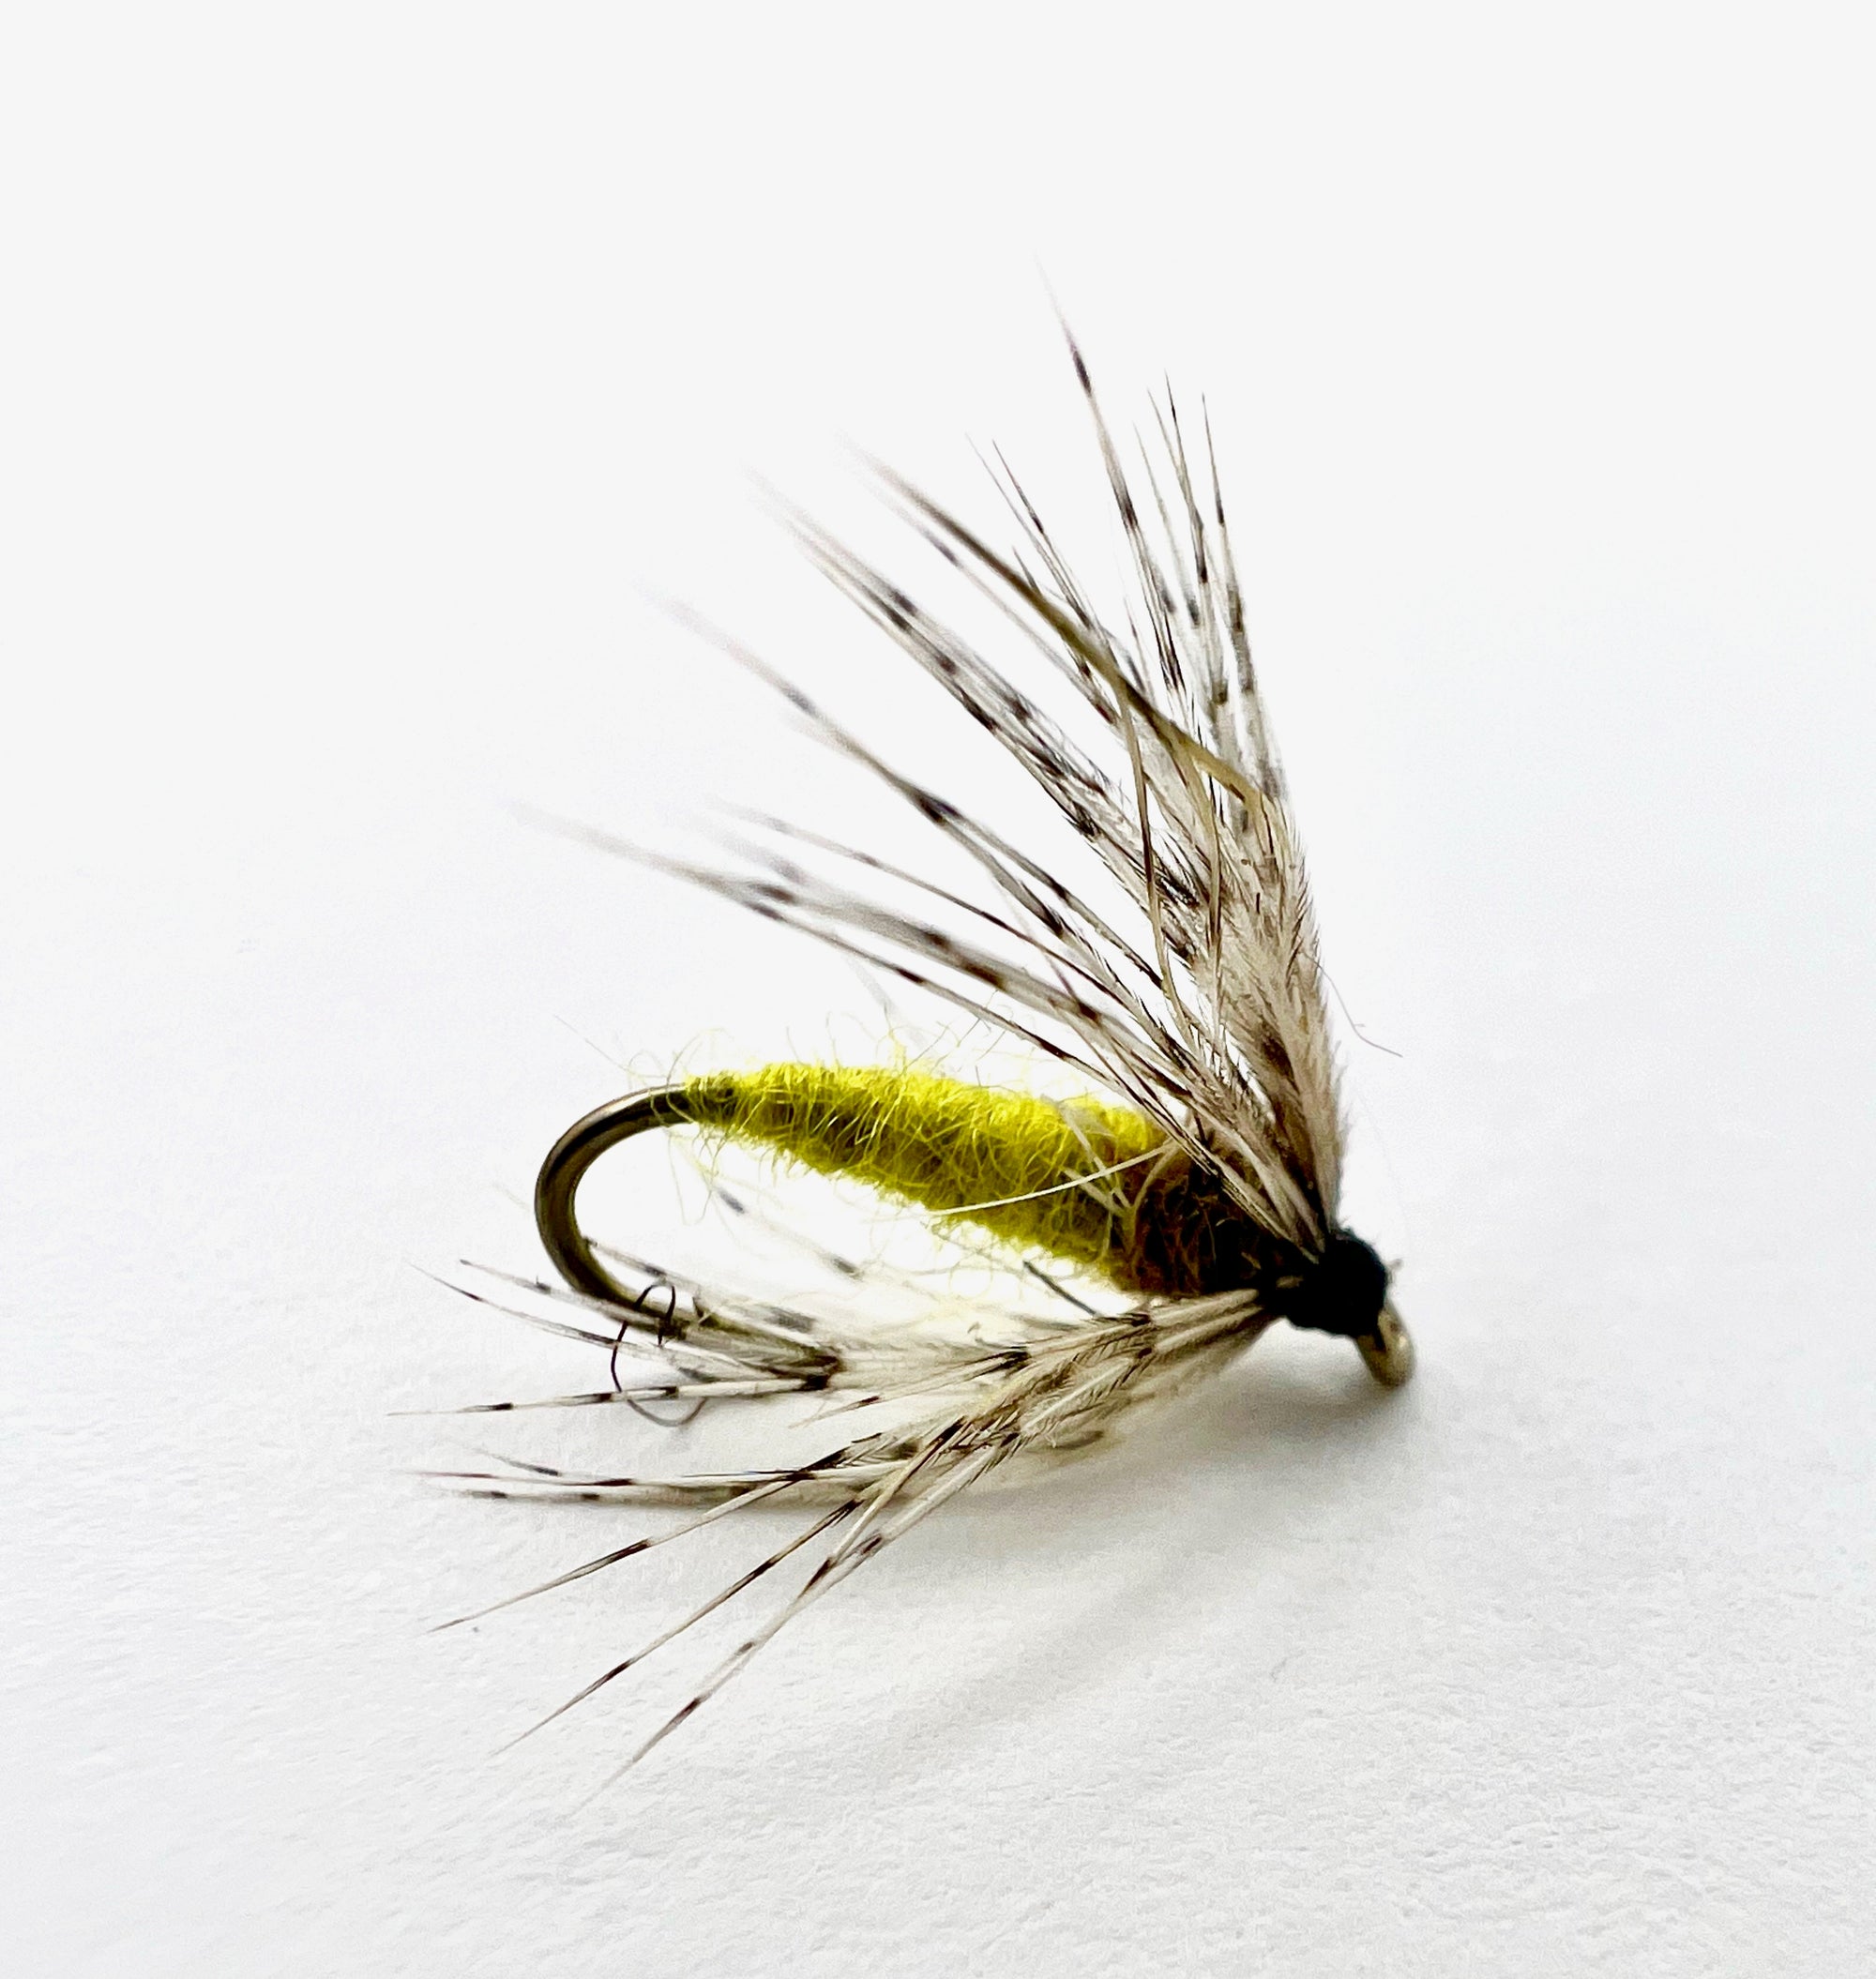 Fly Tying With Gamebird Feathers